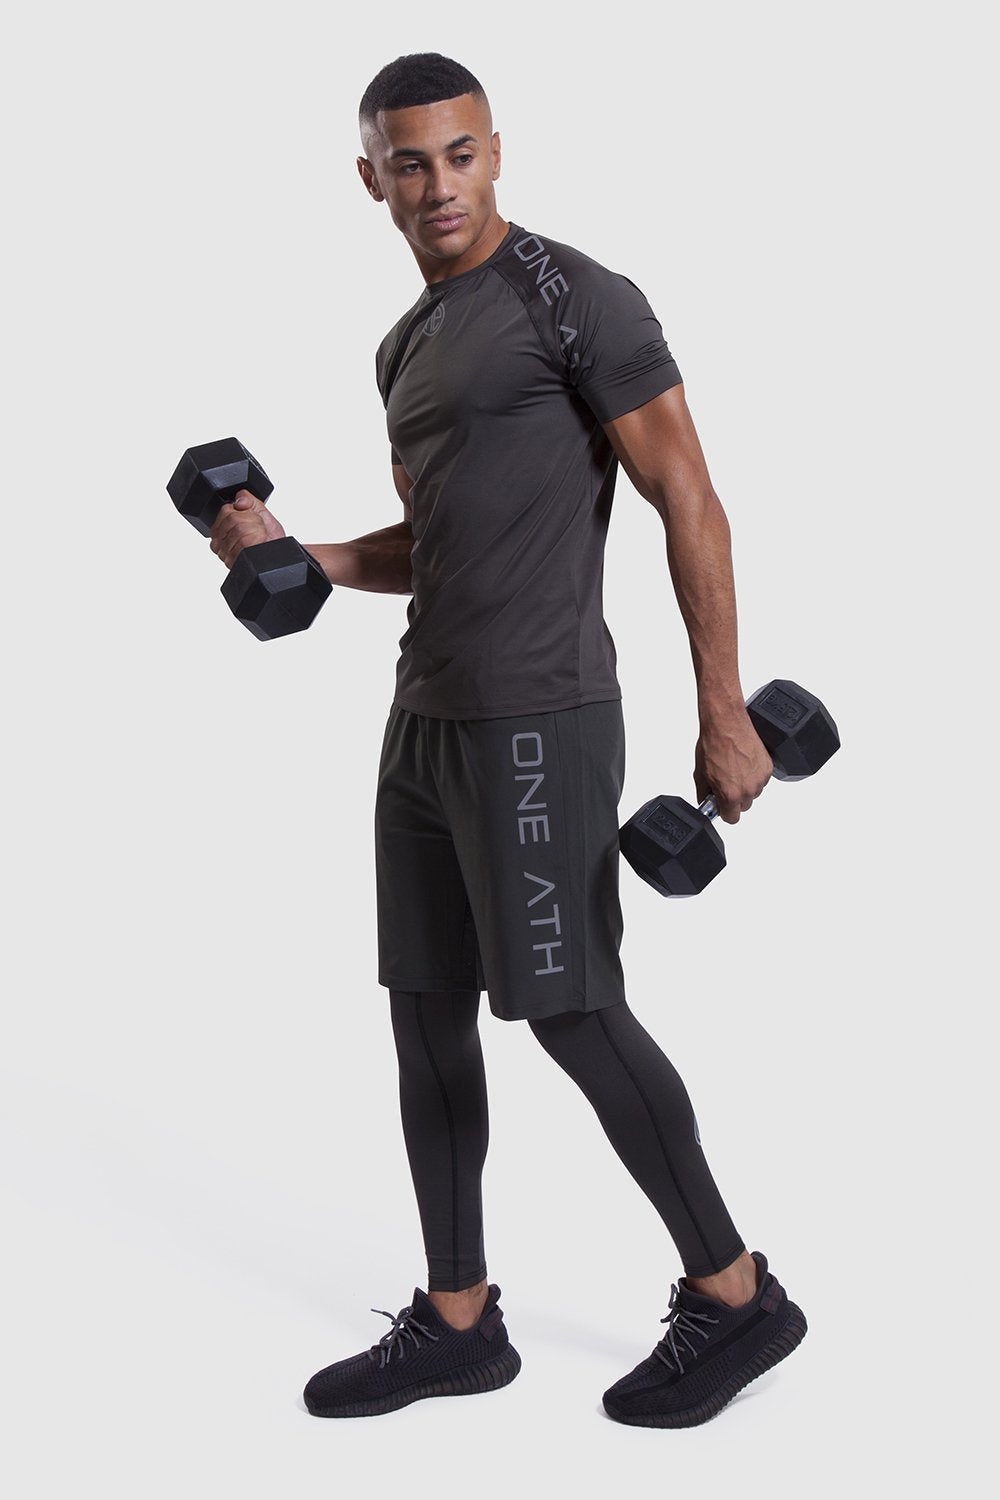 Person lifting 2 dumbbells in mens gym t-shirt and shorts